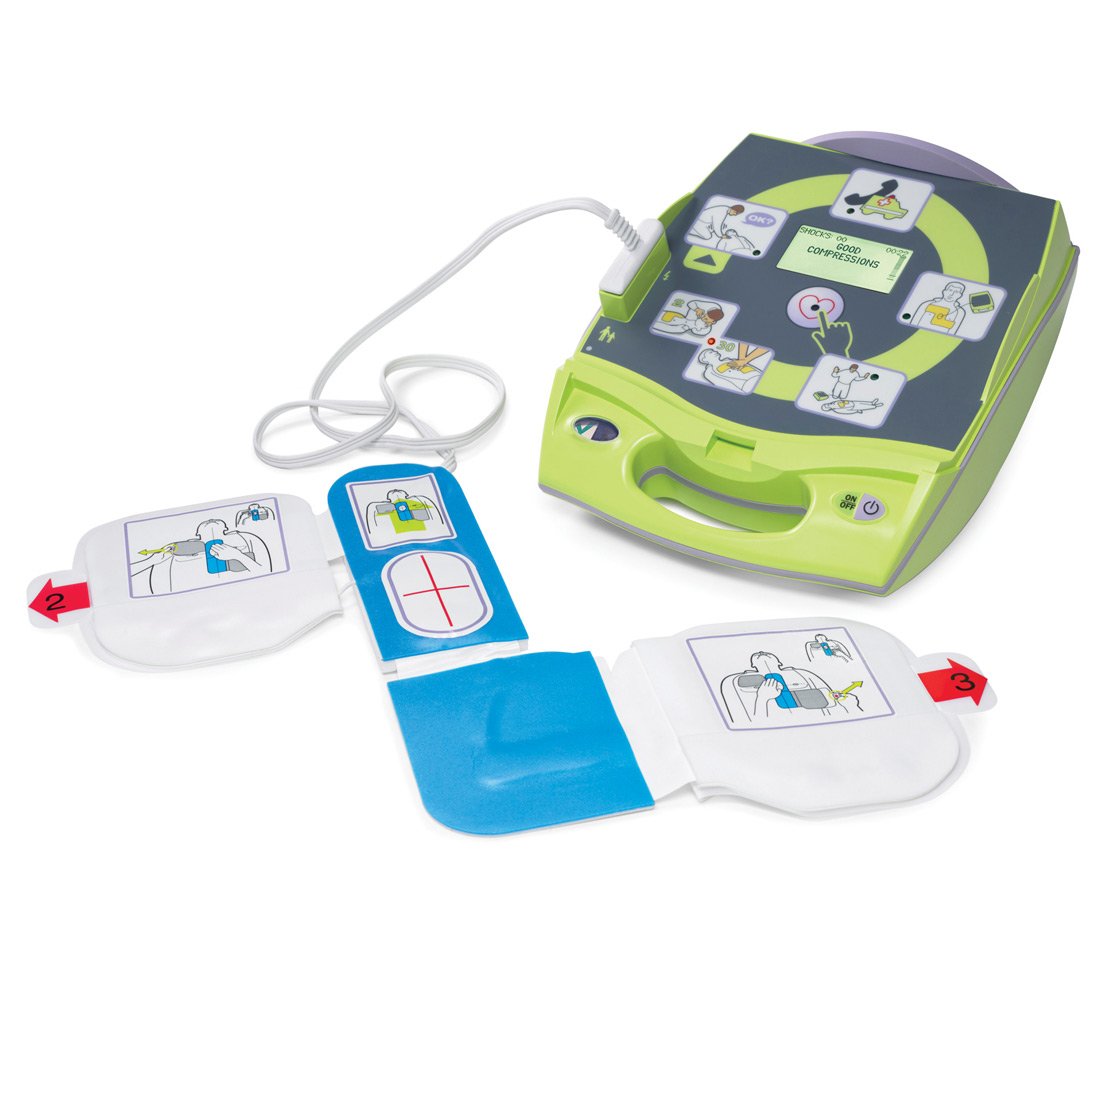 ZOLL AED Plus Automated External Defibrillator COMPLETE WITH BATTERIES, ADULT CPR PADZ AND CARRYING CASE